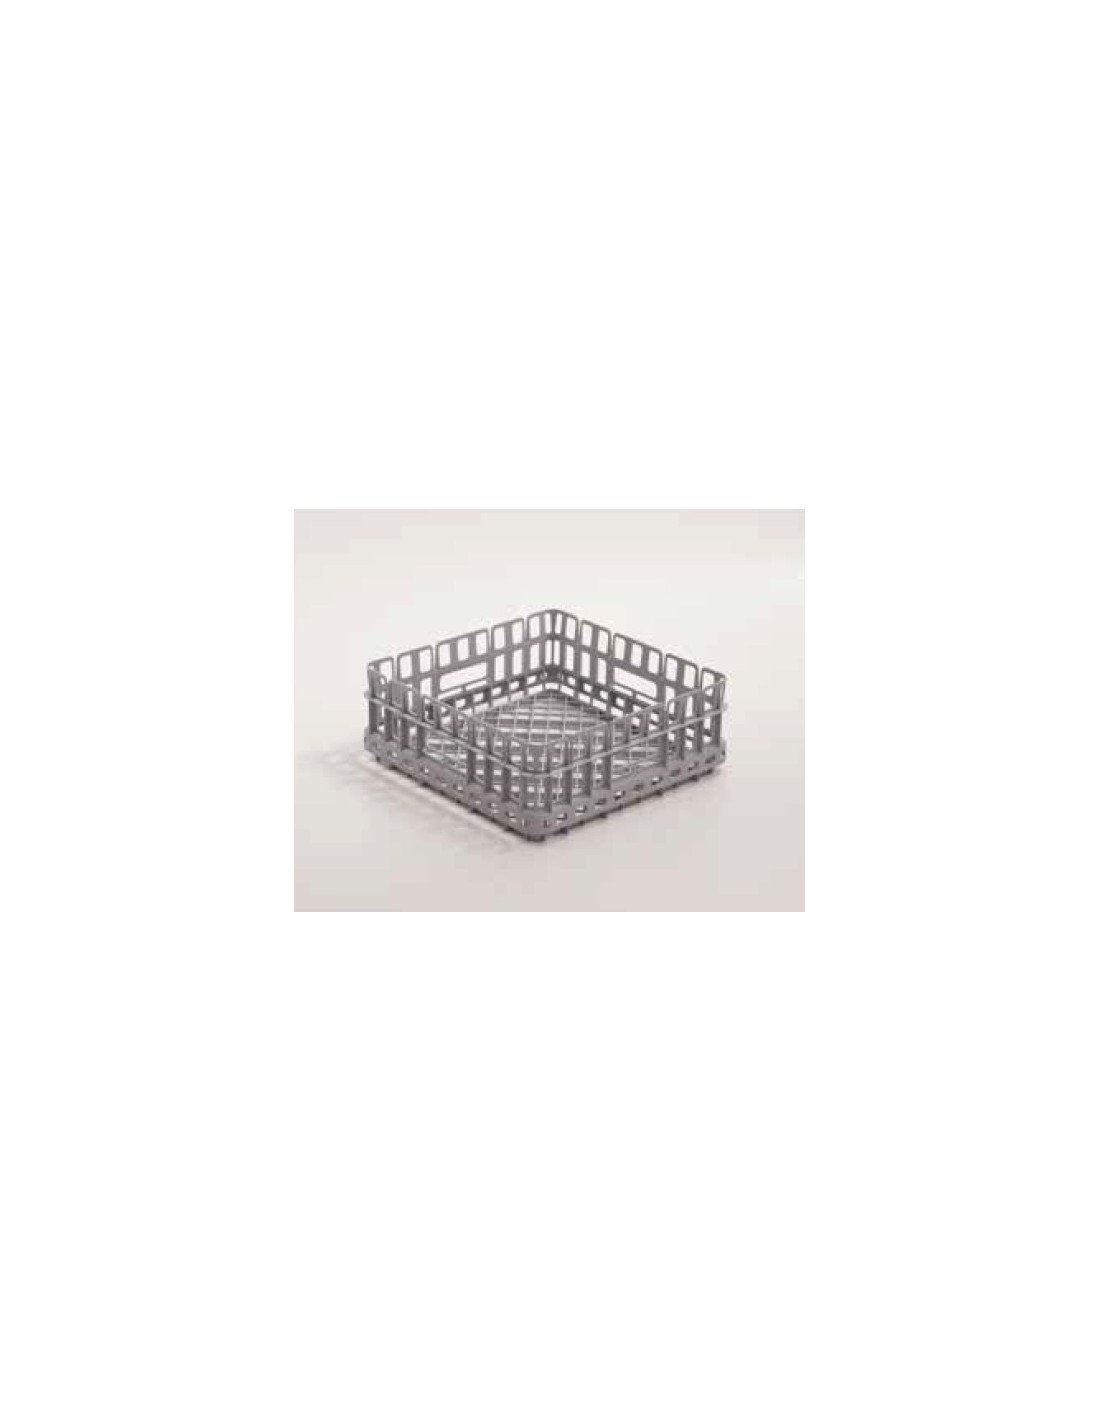 Square cup basket floor bottom - Size cm 39 x 39 x 15 h